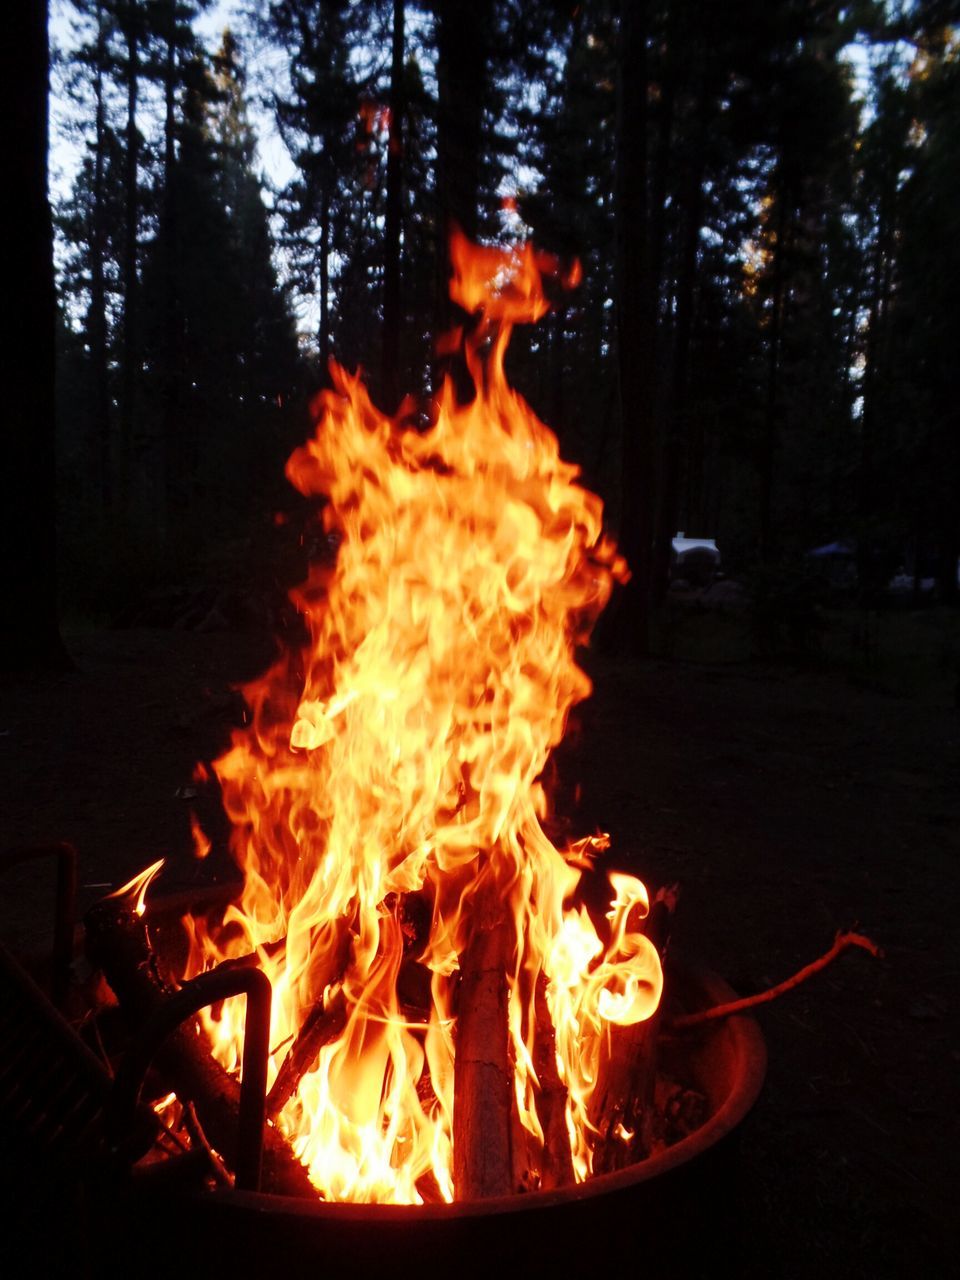 burning, fire - natural phenomenon, flame, heat - temperature, bonfire, firewood, fire, glowing, campfire, orange color, night, heat, motion, outdoors, wood - material, close-up, forest, no people, tree, log